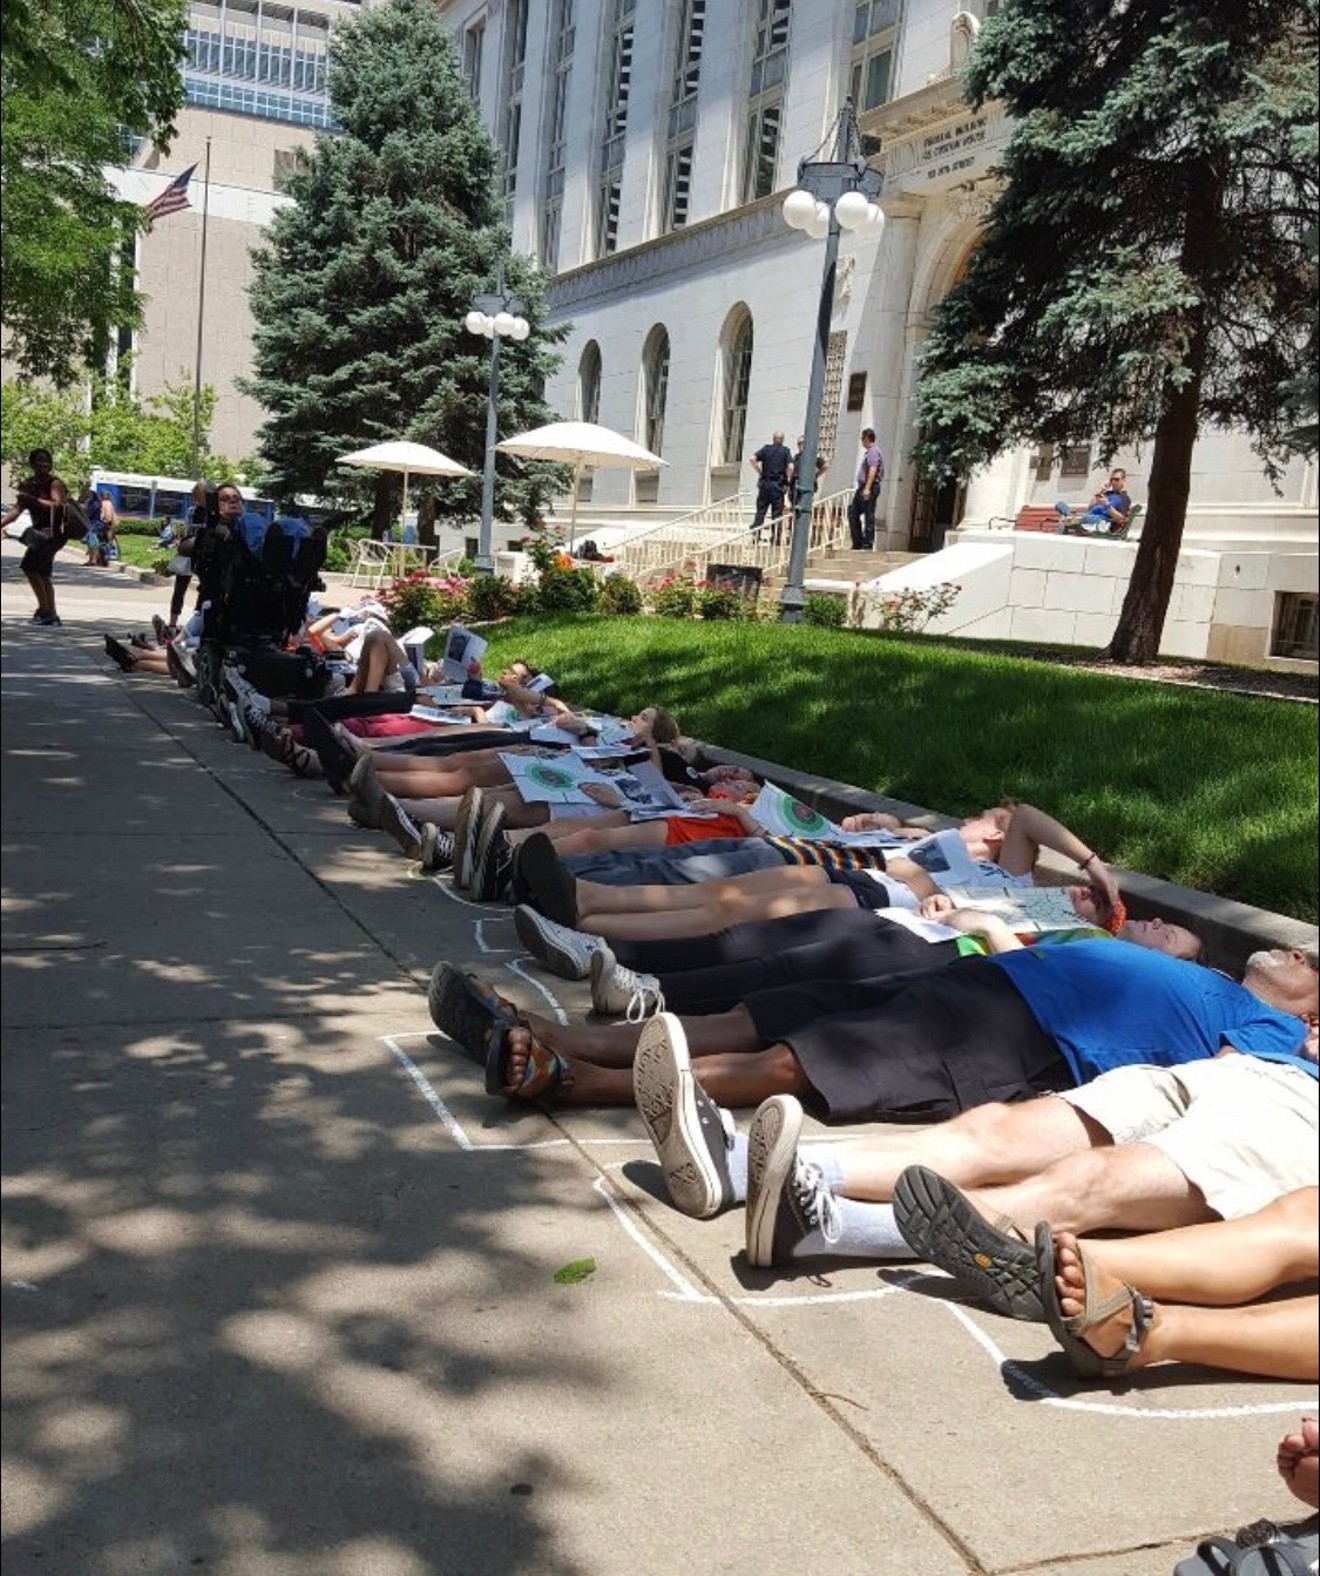 Students stage a "die-in" outside of Senator Cory Gardner's office, similar to the one planned for Saturday at the Capitol.